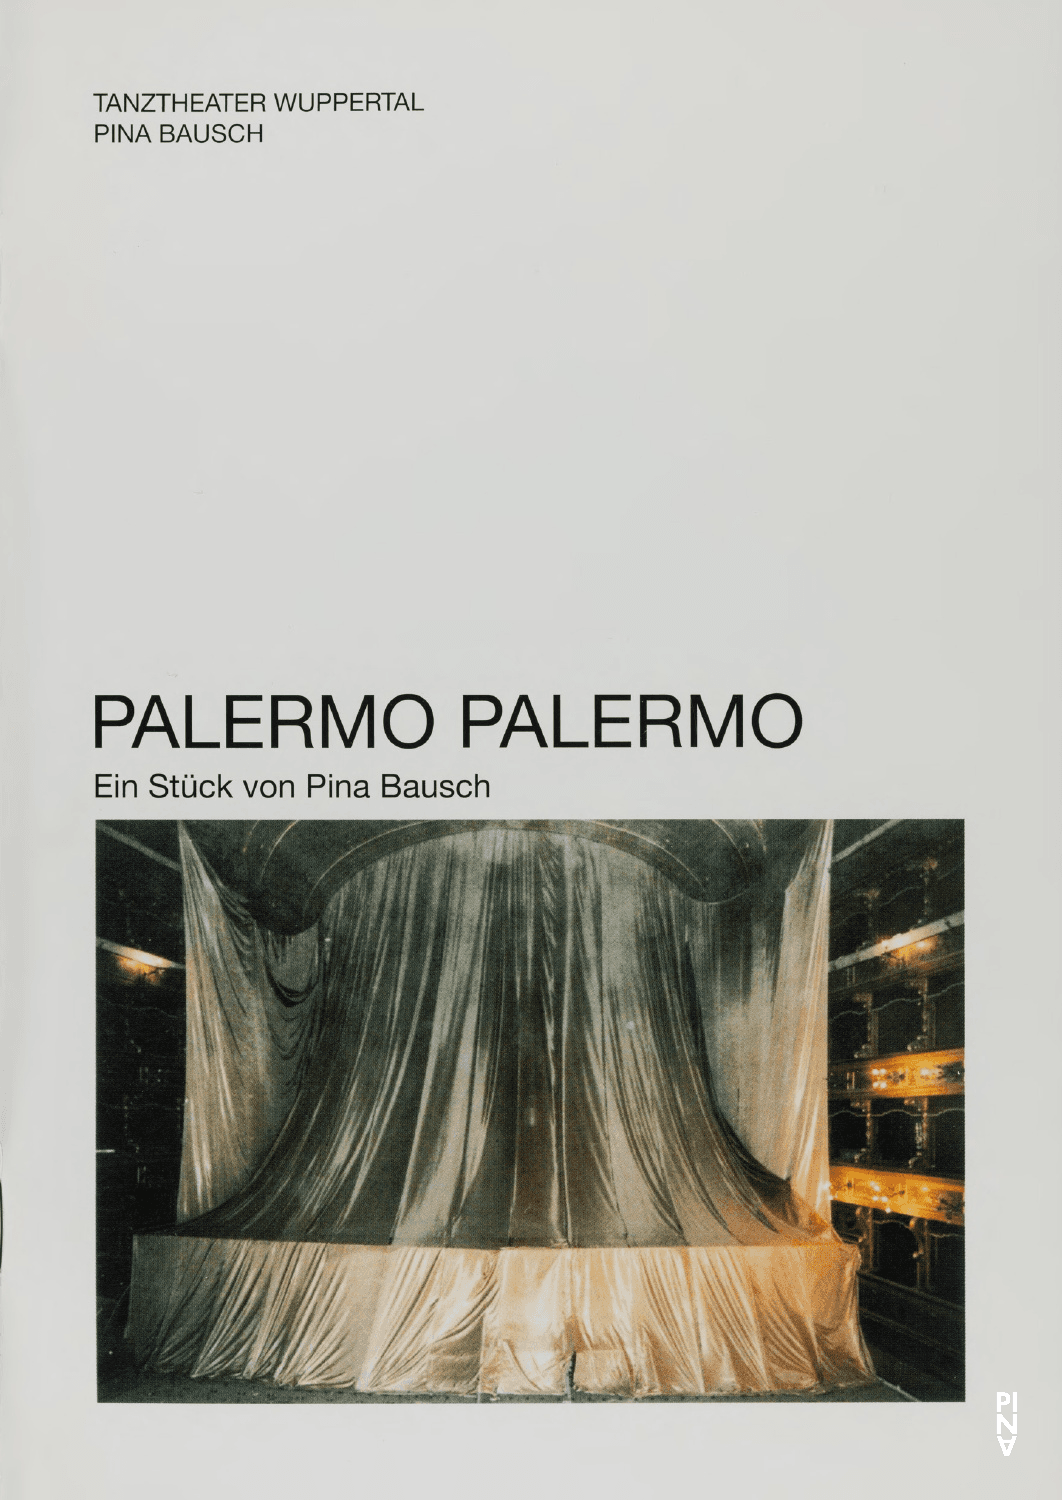 Booklet for “Palermo Palermo” by Pina Bausch with Tanztheater Wuppertal in in Wuppertal, 01/12/2011 – 01/16/2011